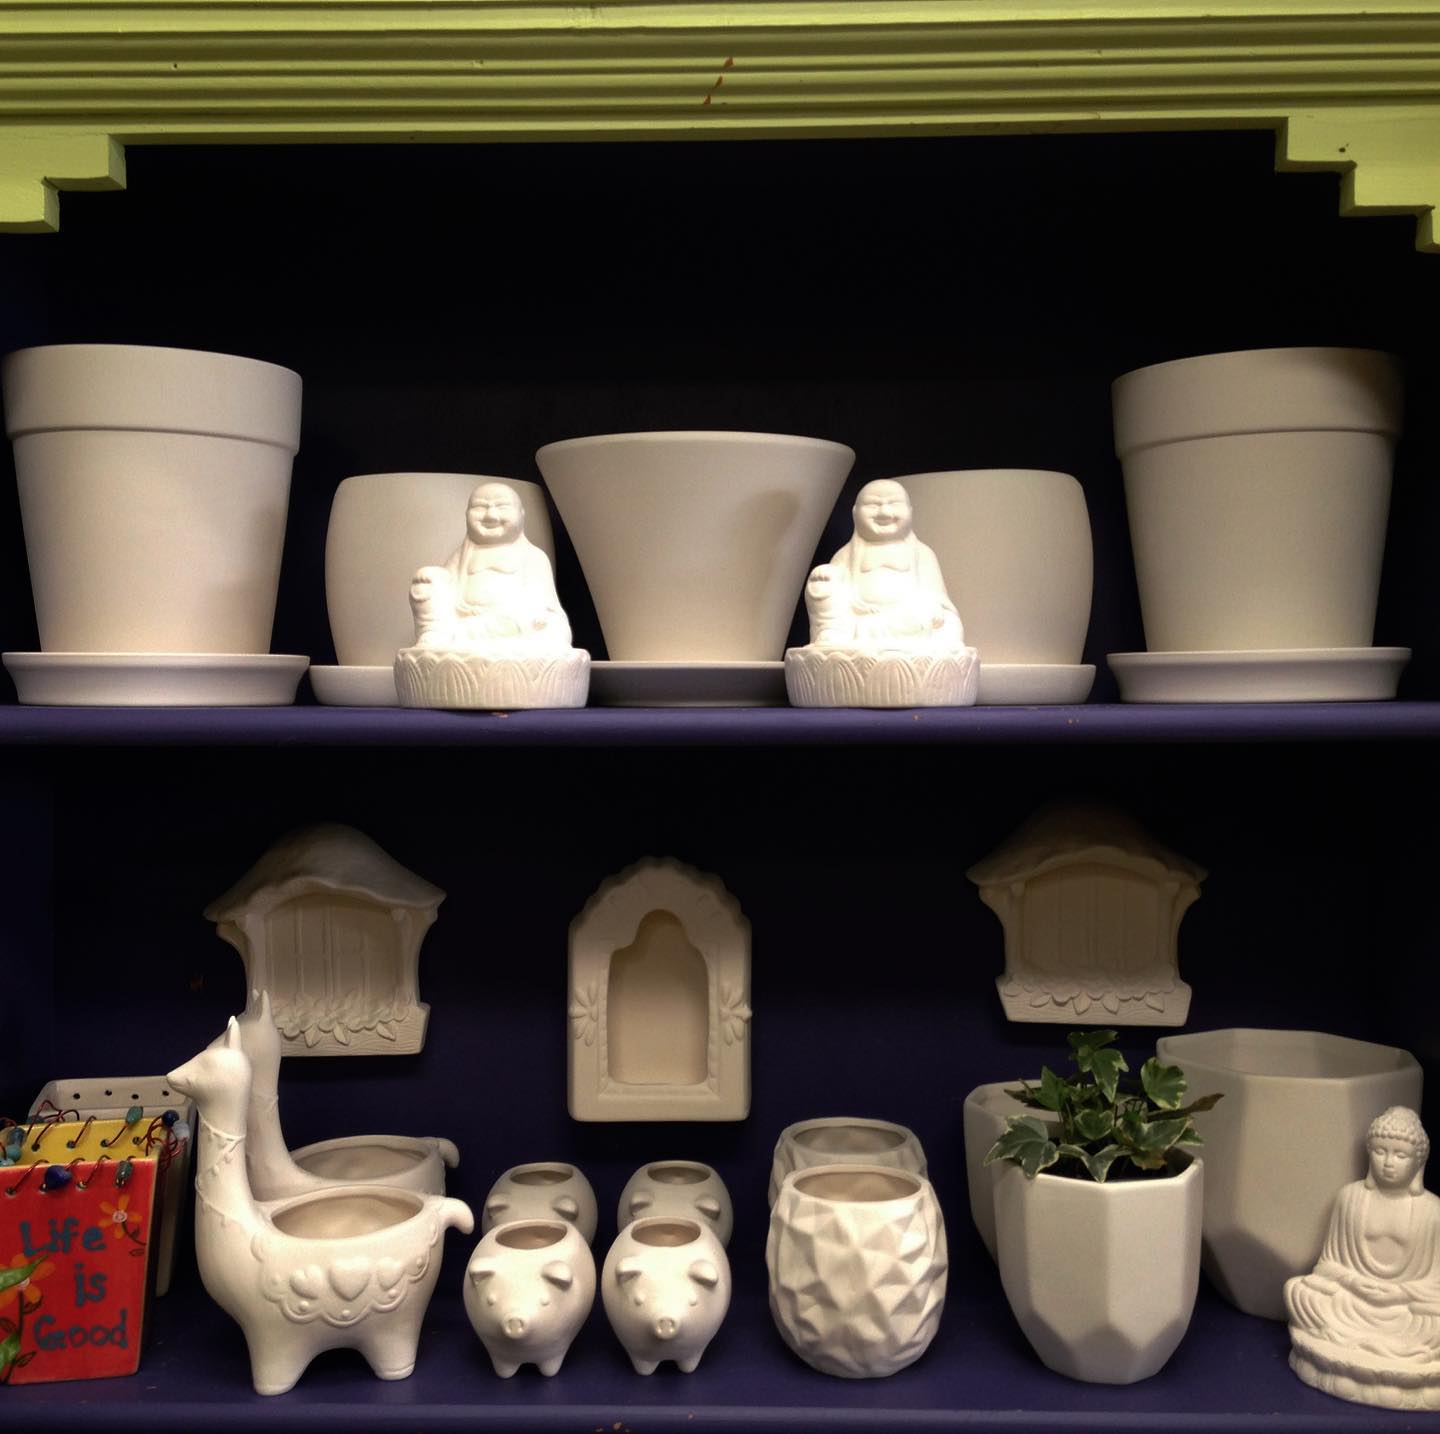 Paint your own pottery. There are multiple statues, bowls and planters to paint!